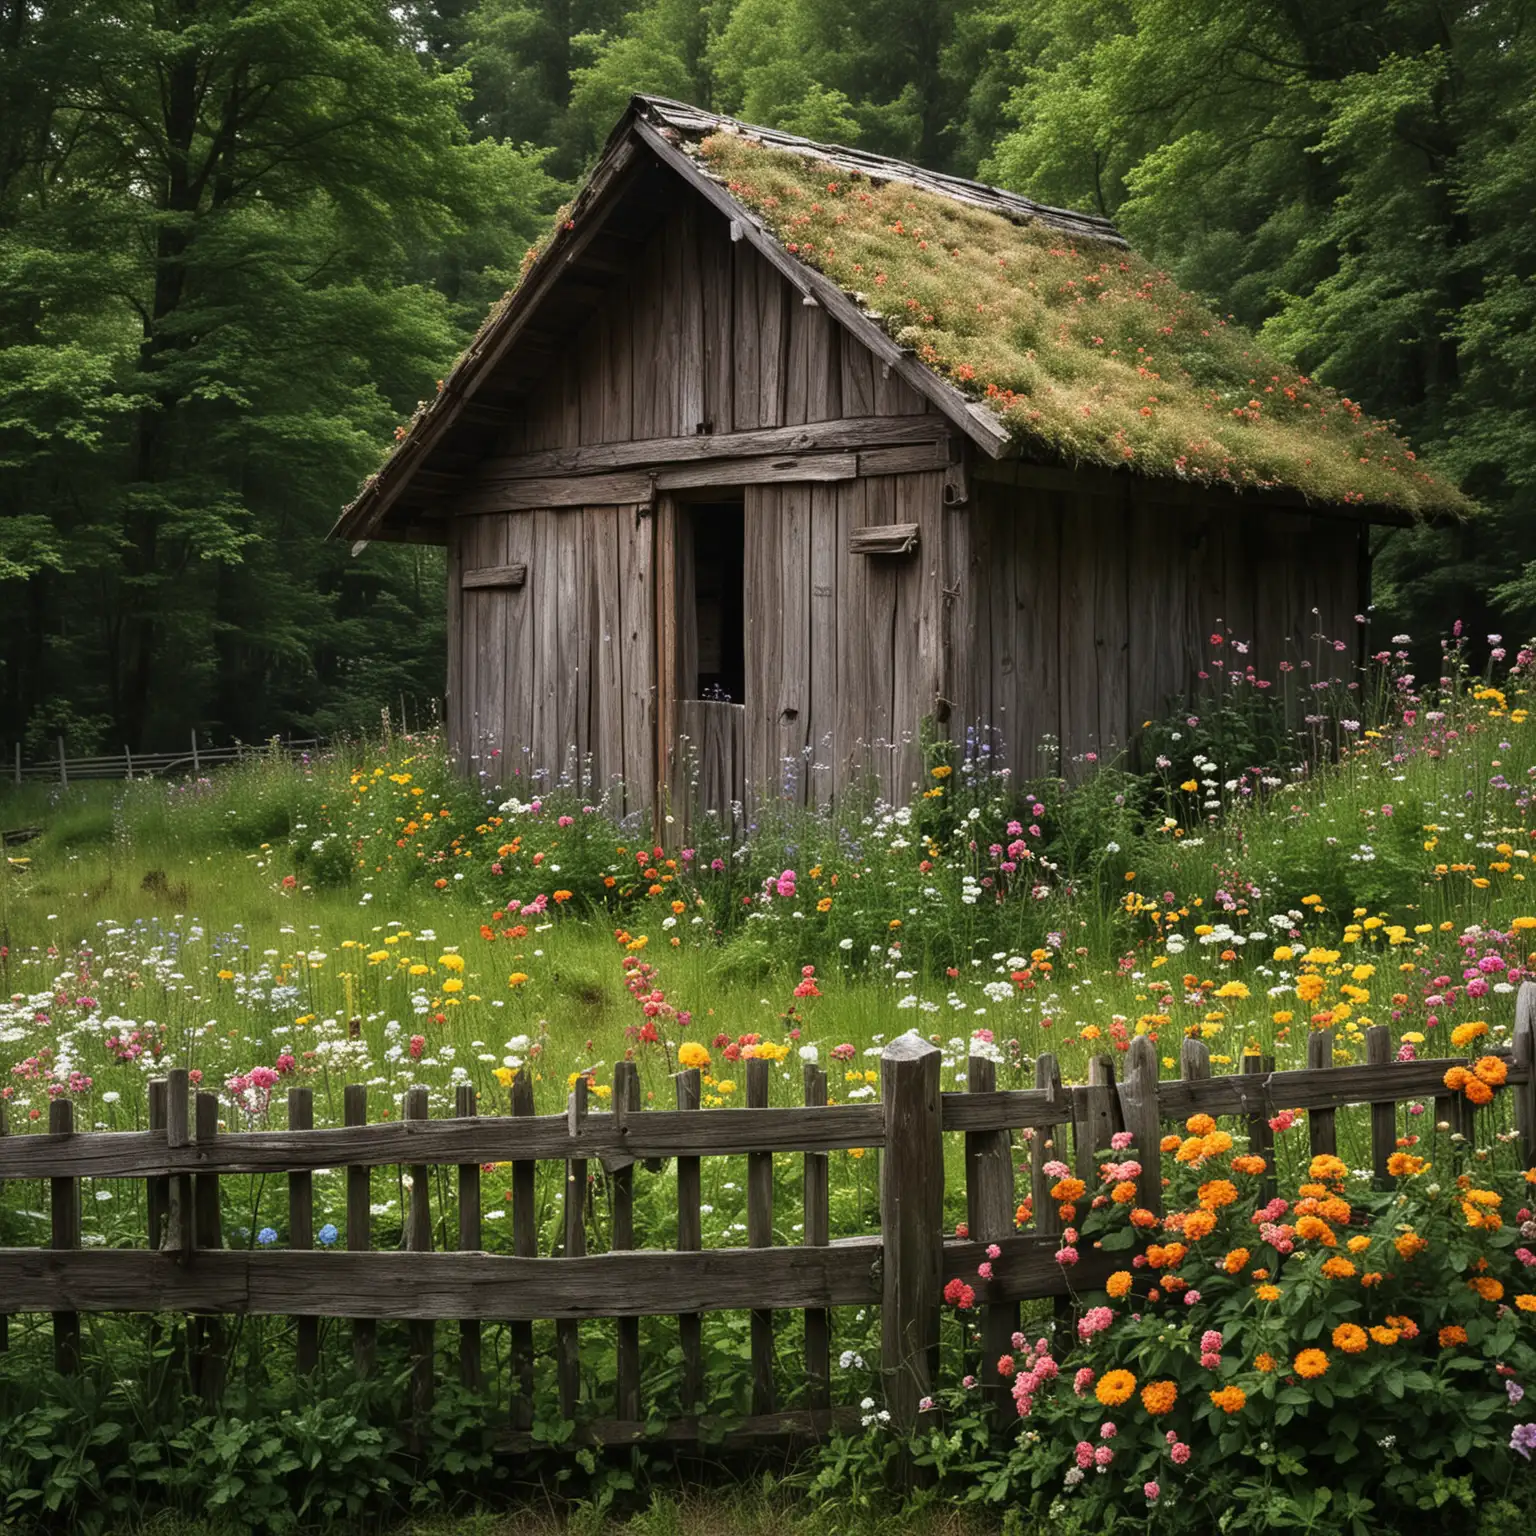 aesthetics, old wooden hut, flowers, fence, forest